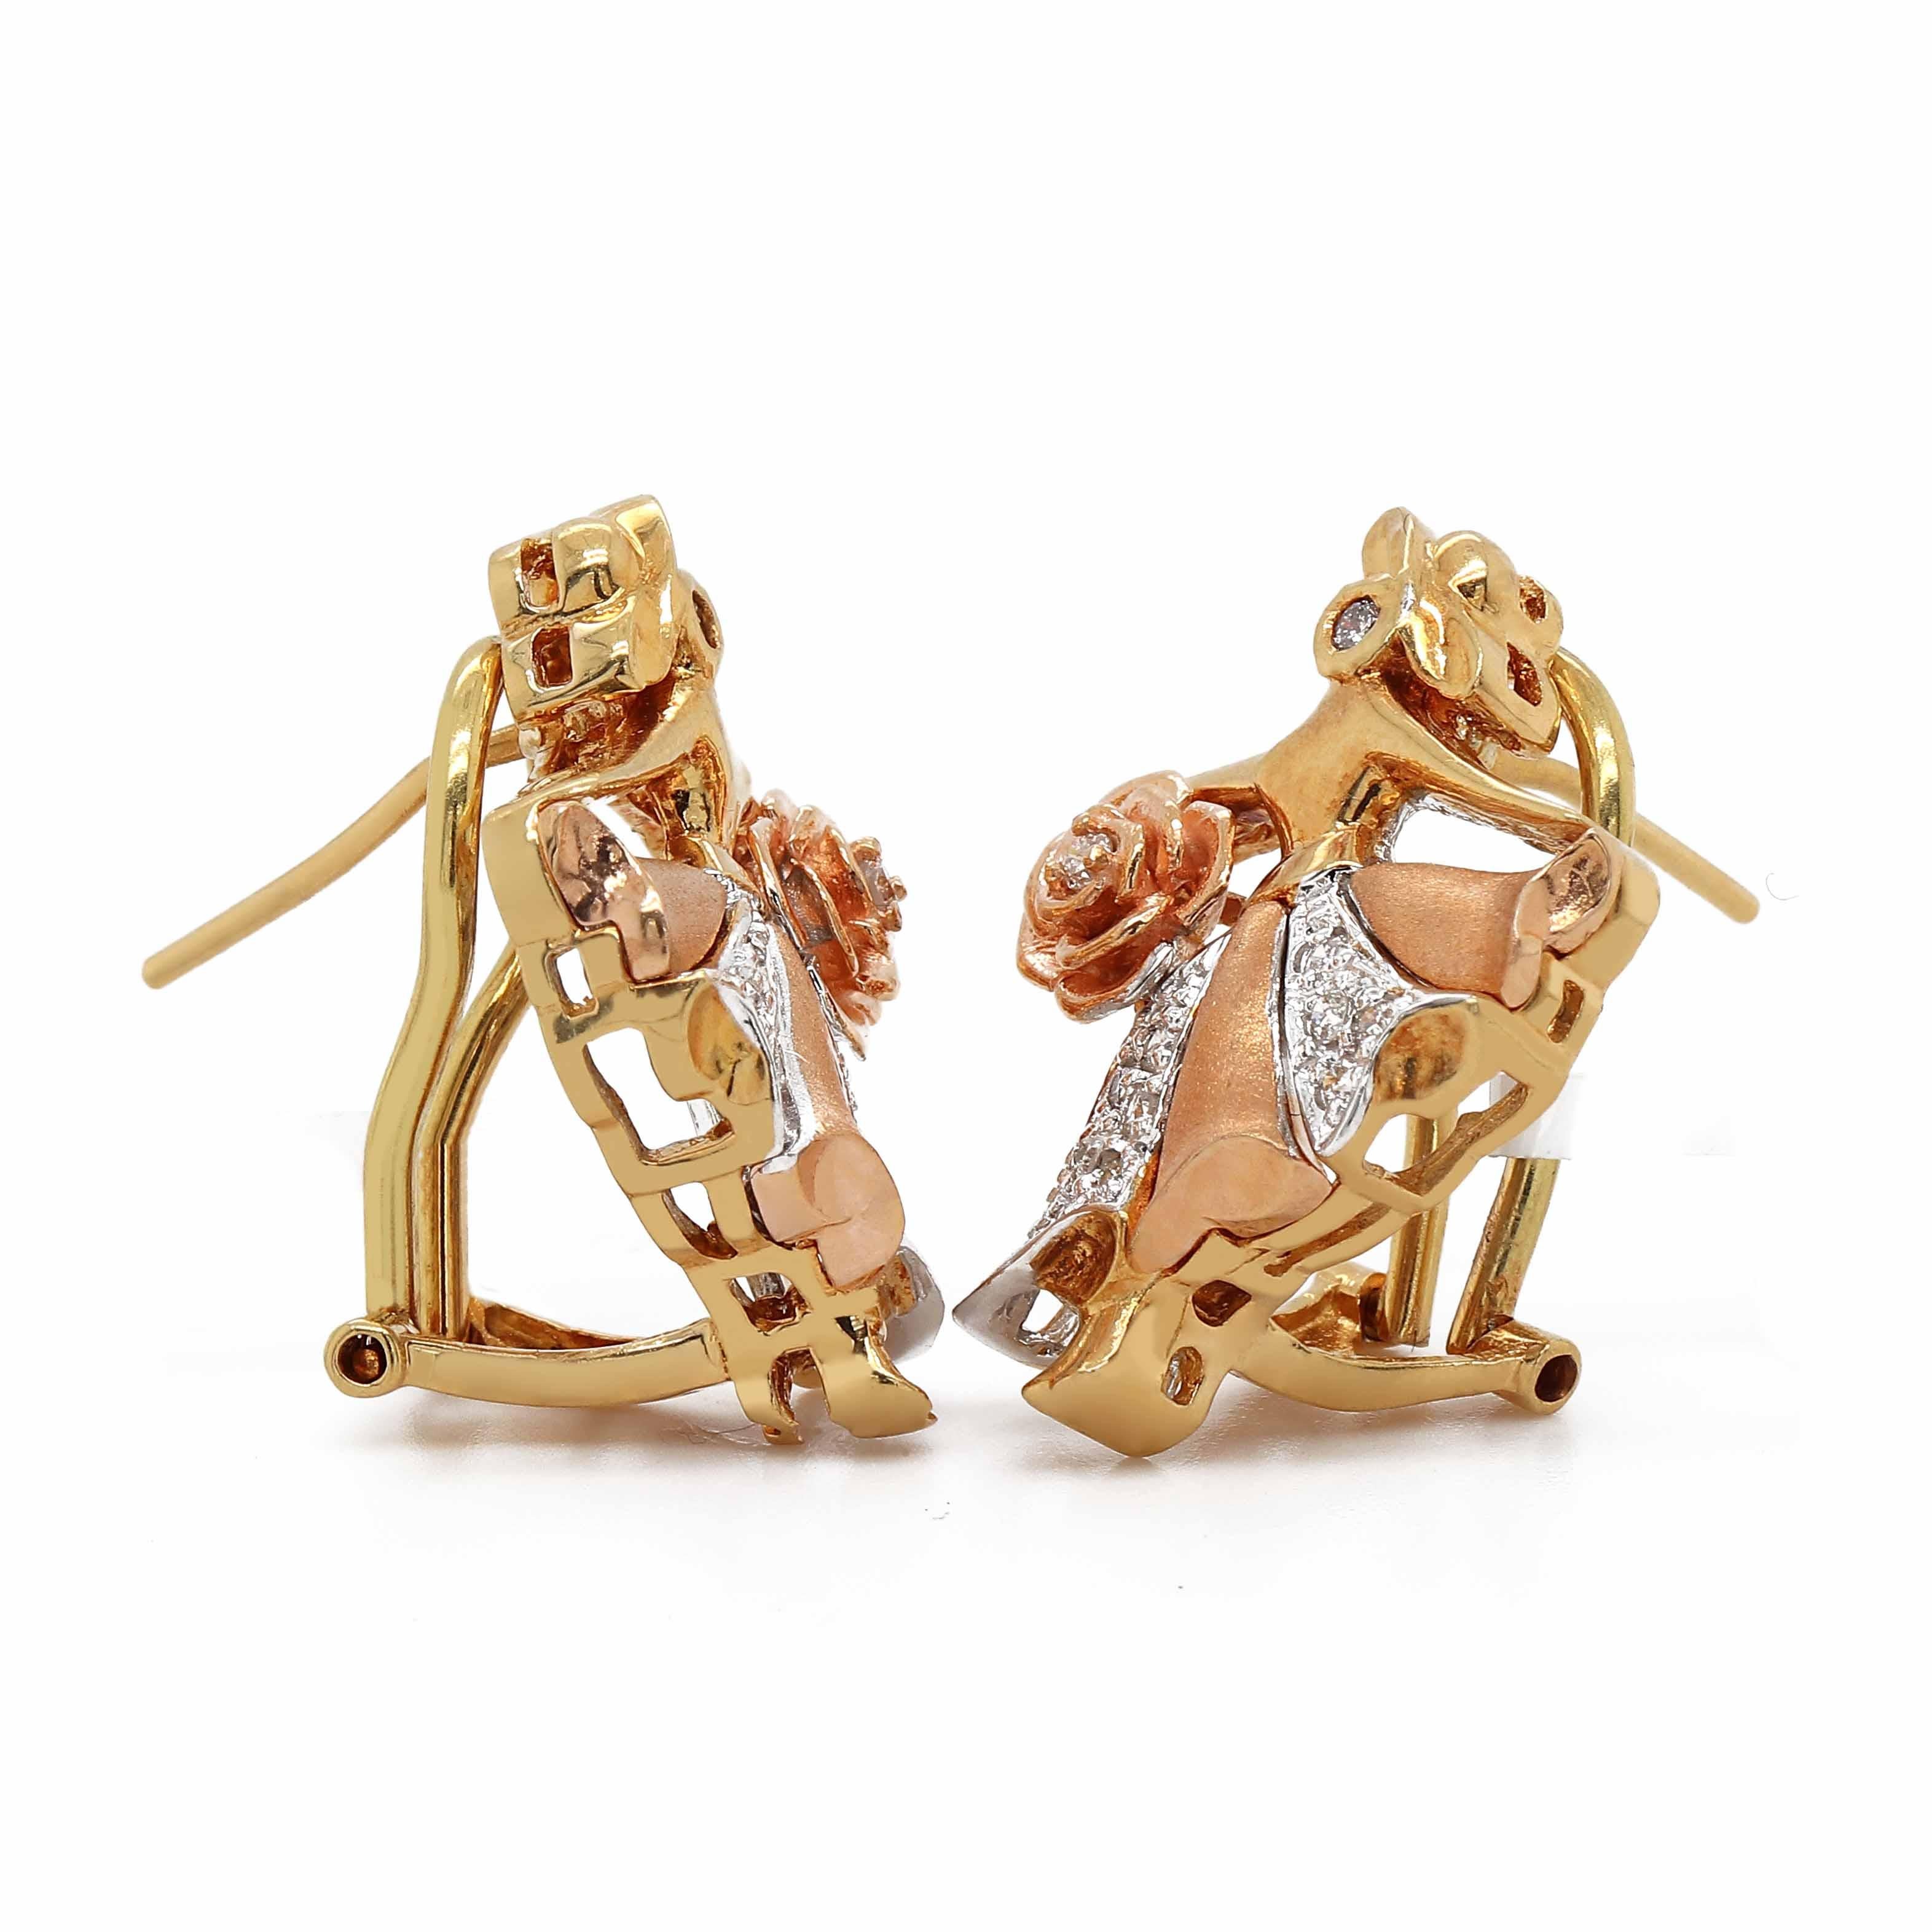 Diamond Earrings containing 24 round brilliant cut diamonds of about 0.32 carats with a clarity of SI and color H. All stones are set in 18k 2 tone gold. The total weight of the earrings is approximately 10.34 grams.